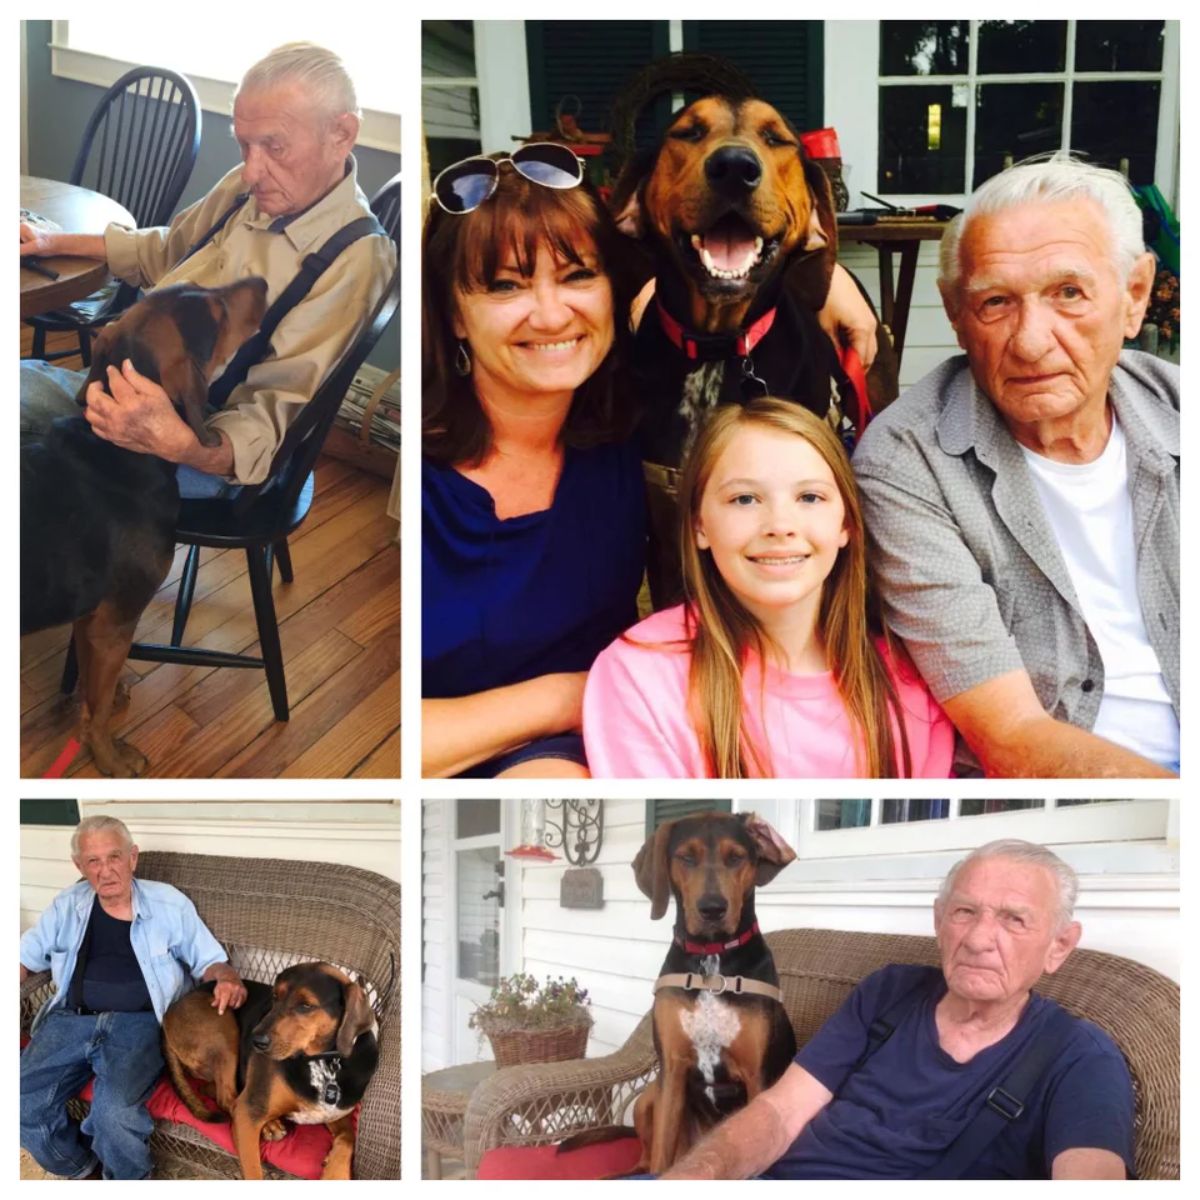 4 photos of an old man with a brown and black dog